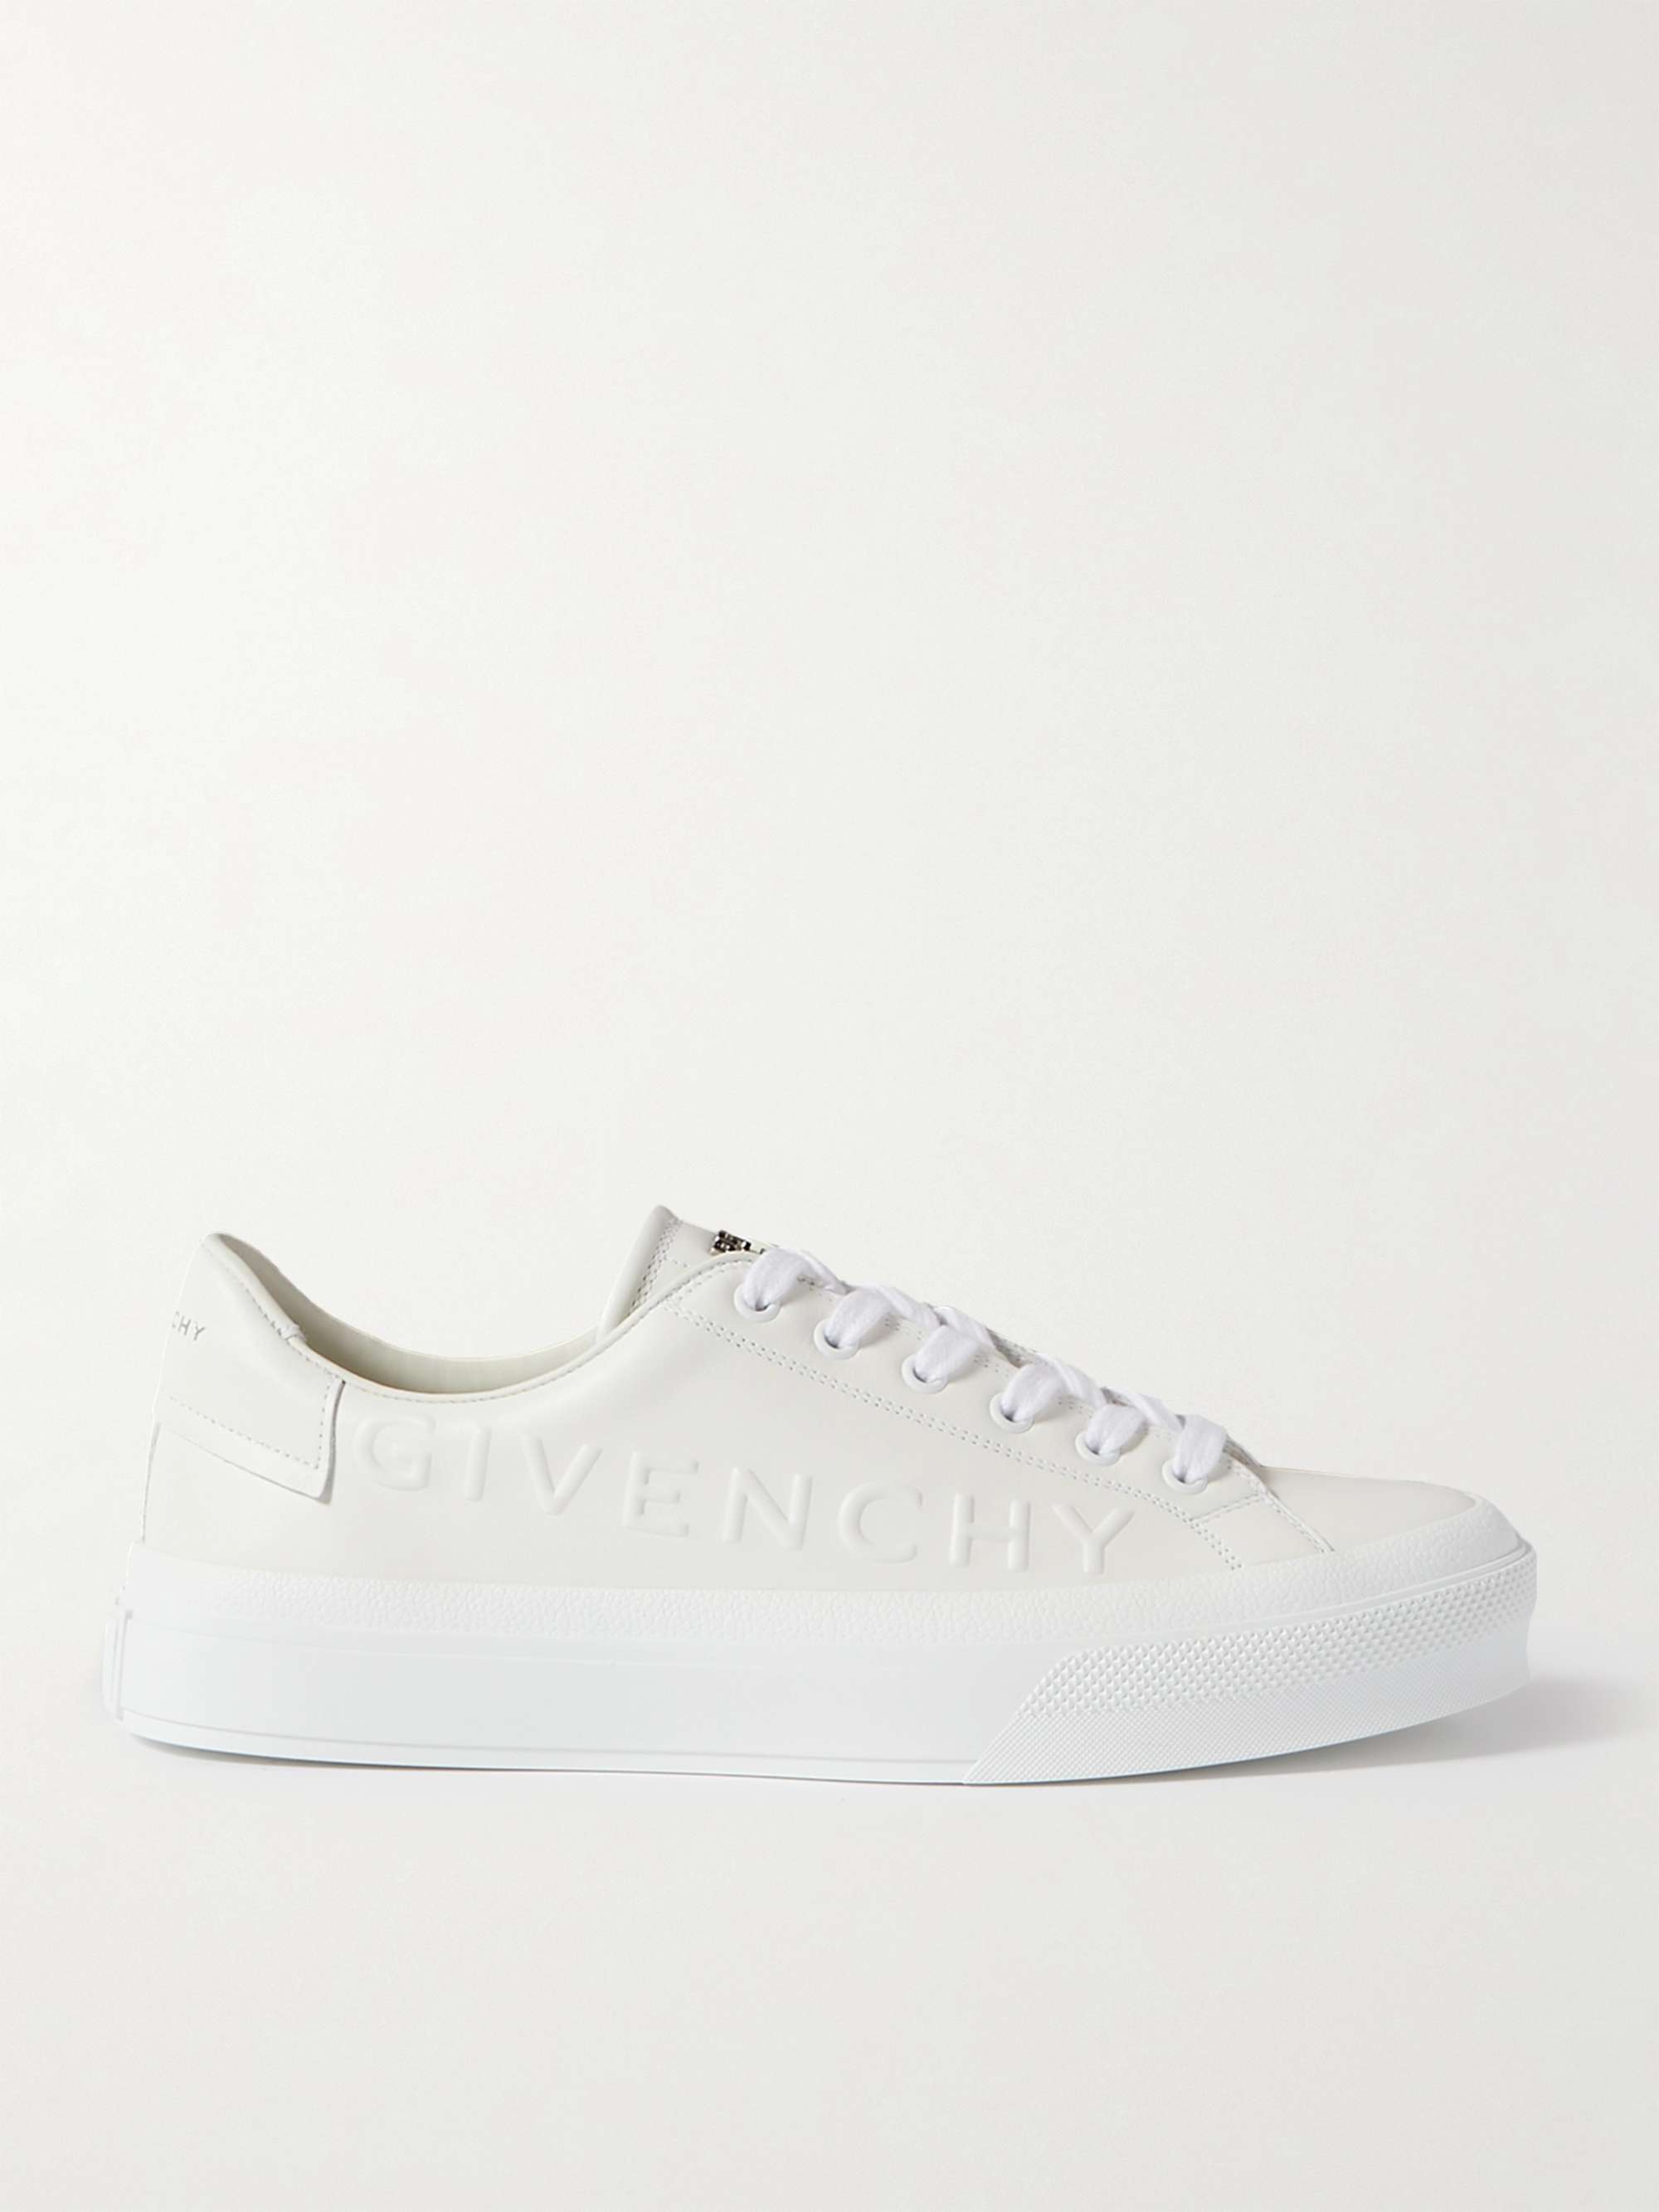 GIVENCHY Logo-Embossed Leather Sneakers for Men | MR PORTER